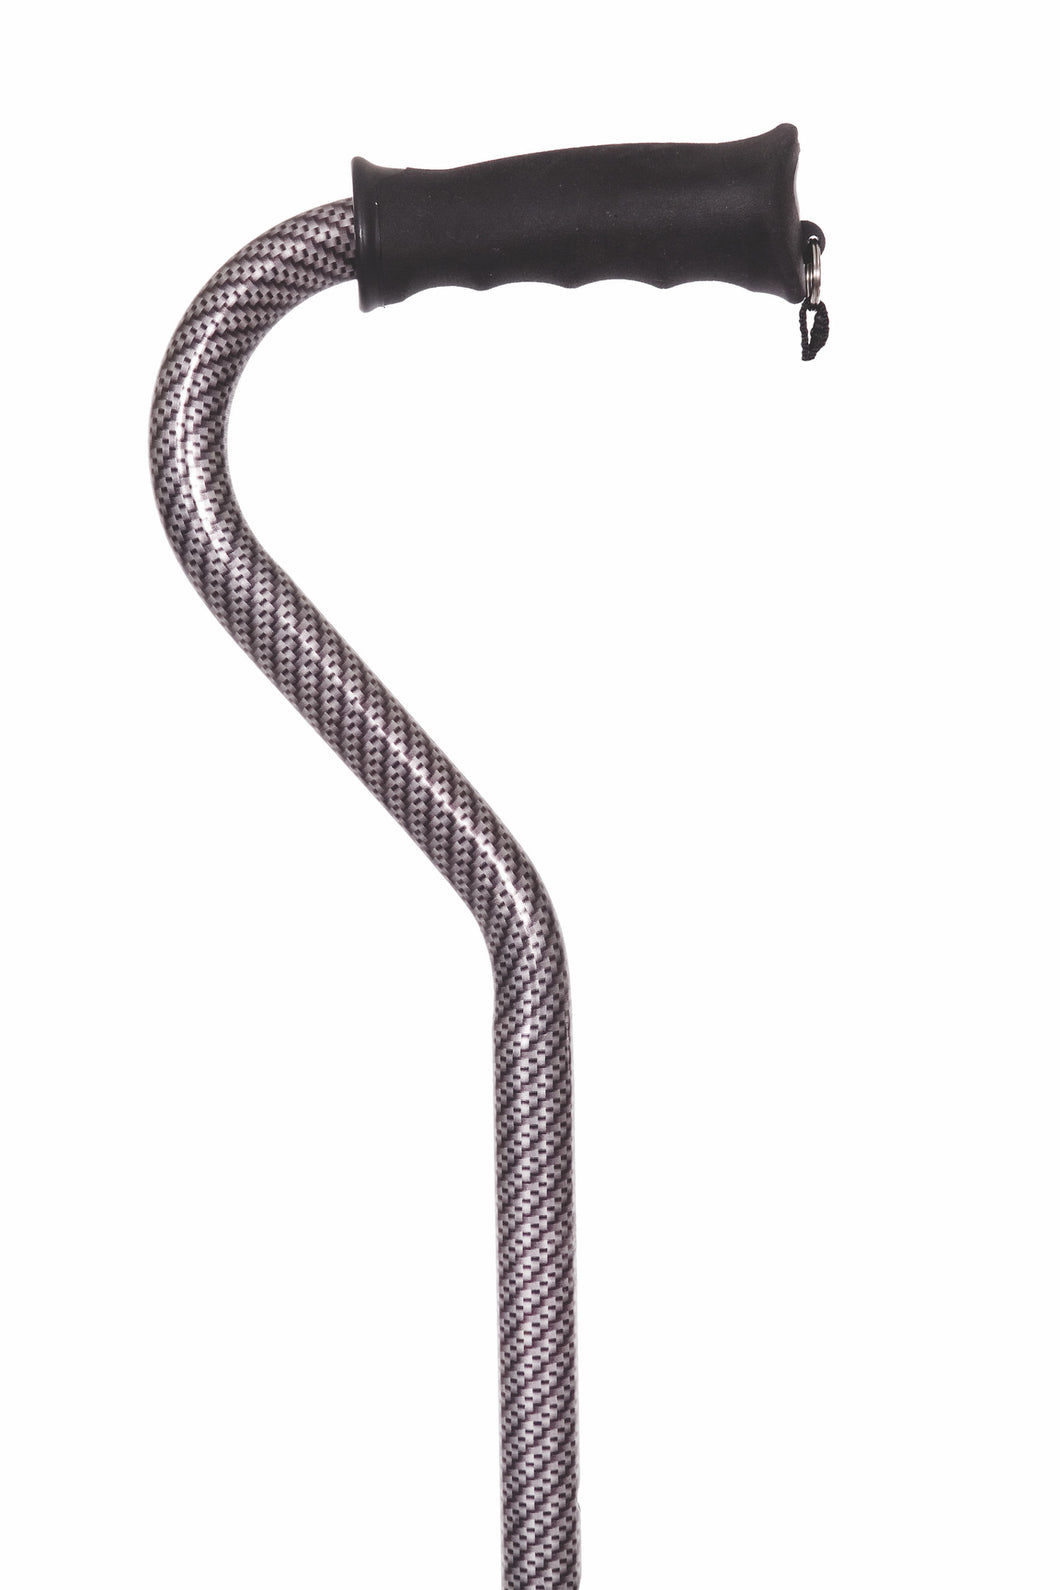 Gentle Touch Offset Cane - Black